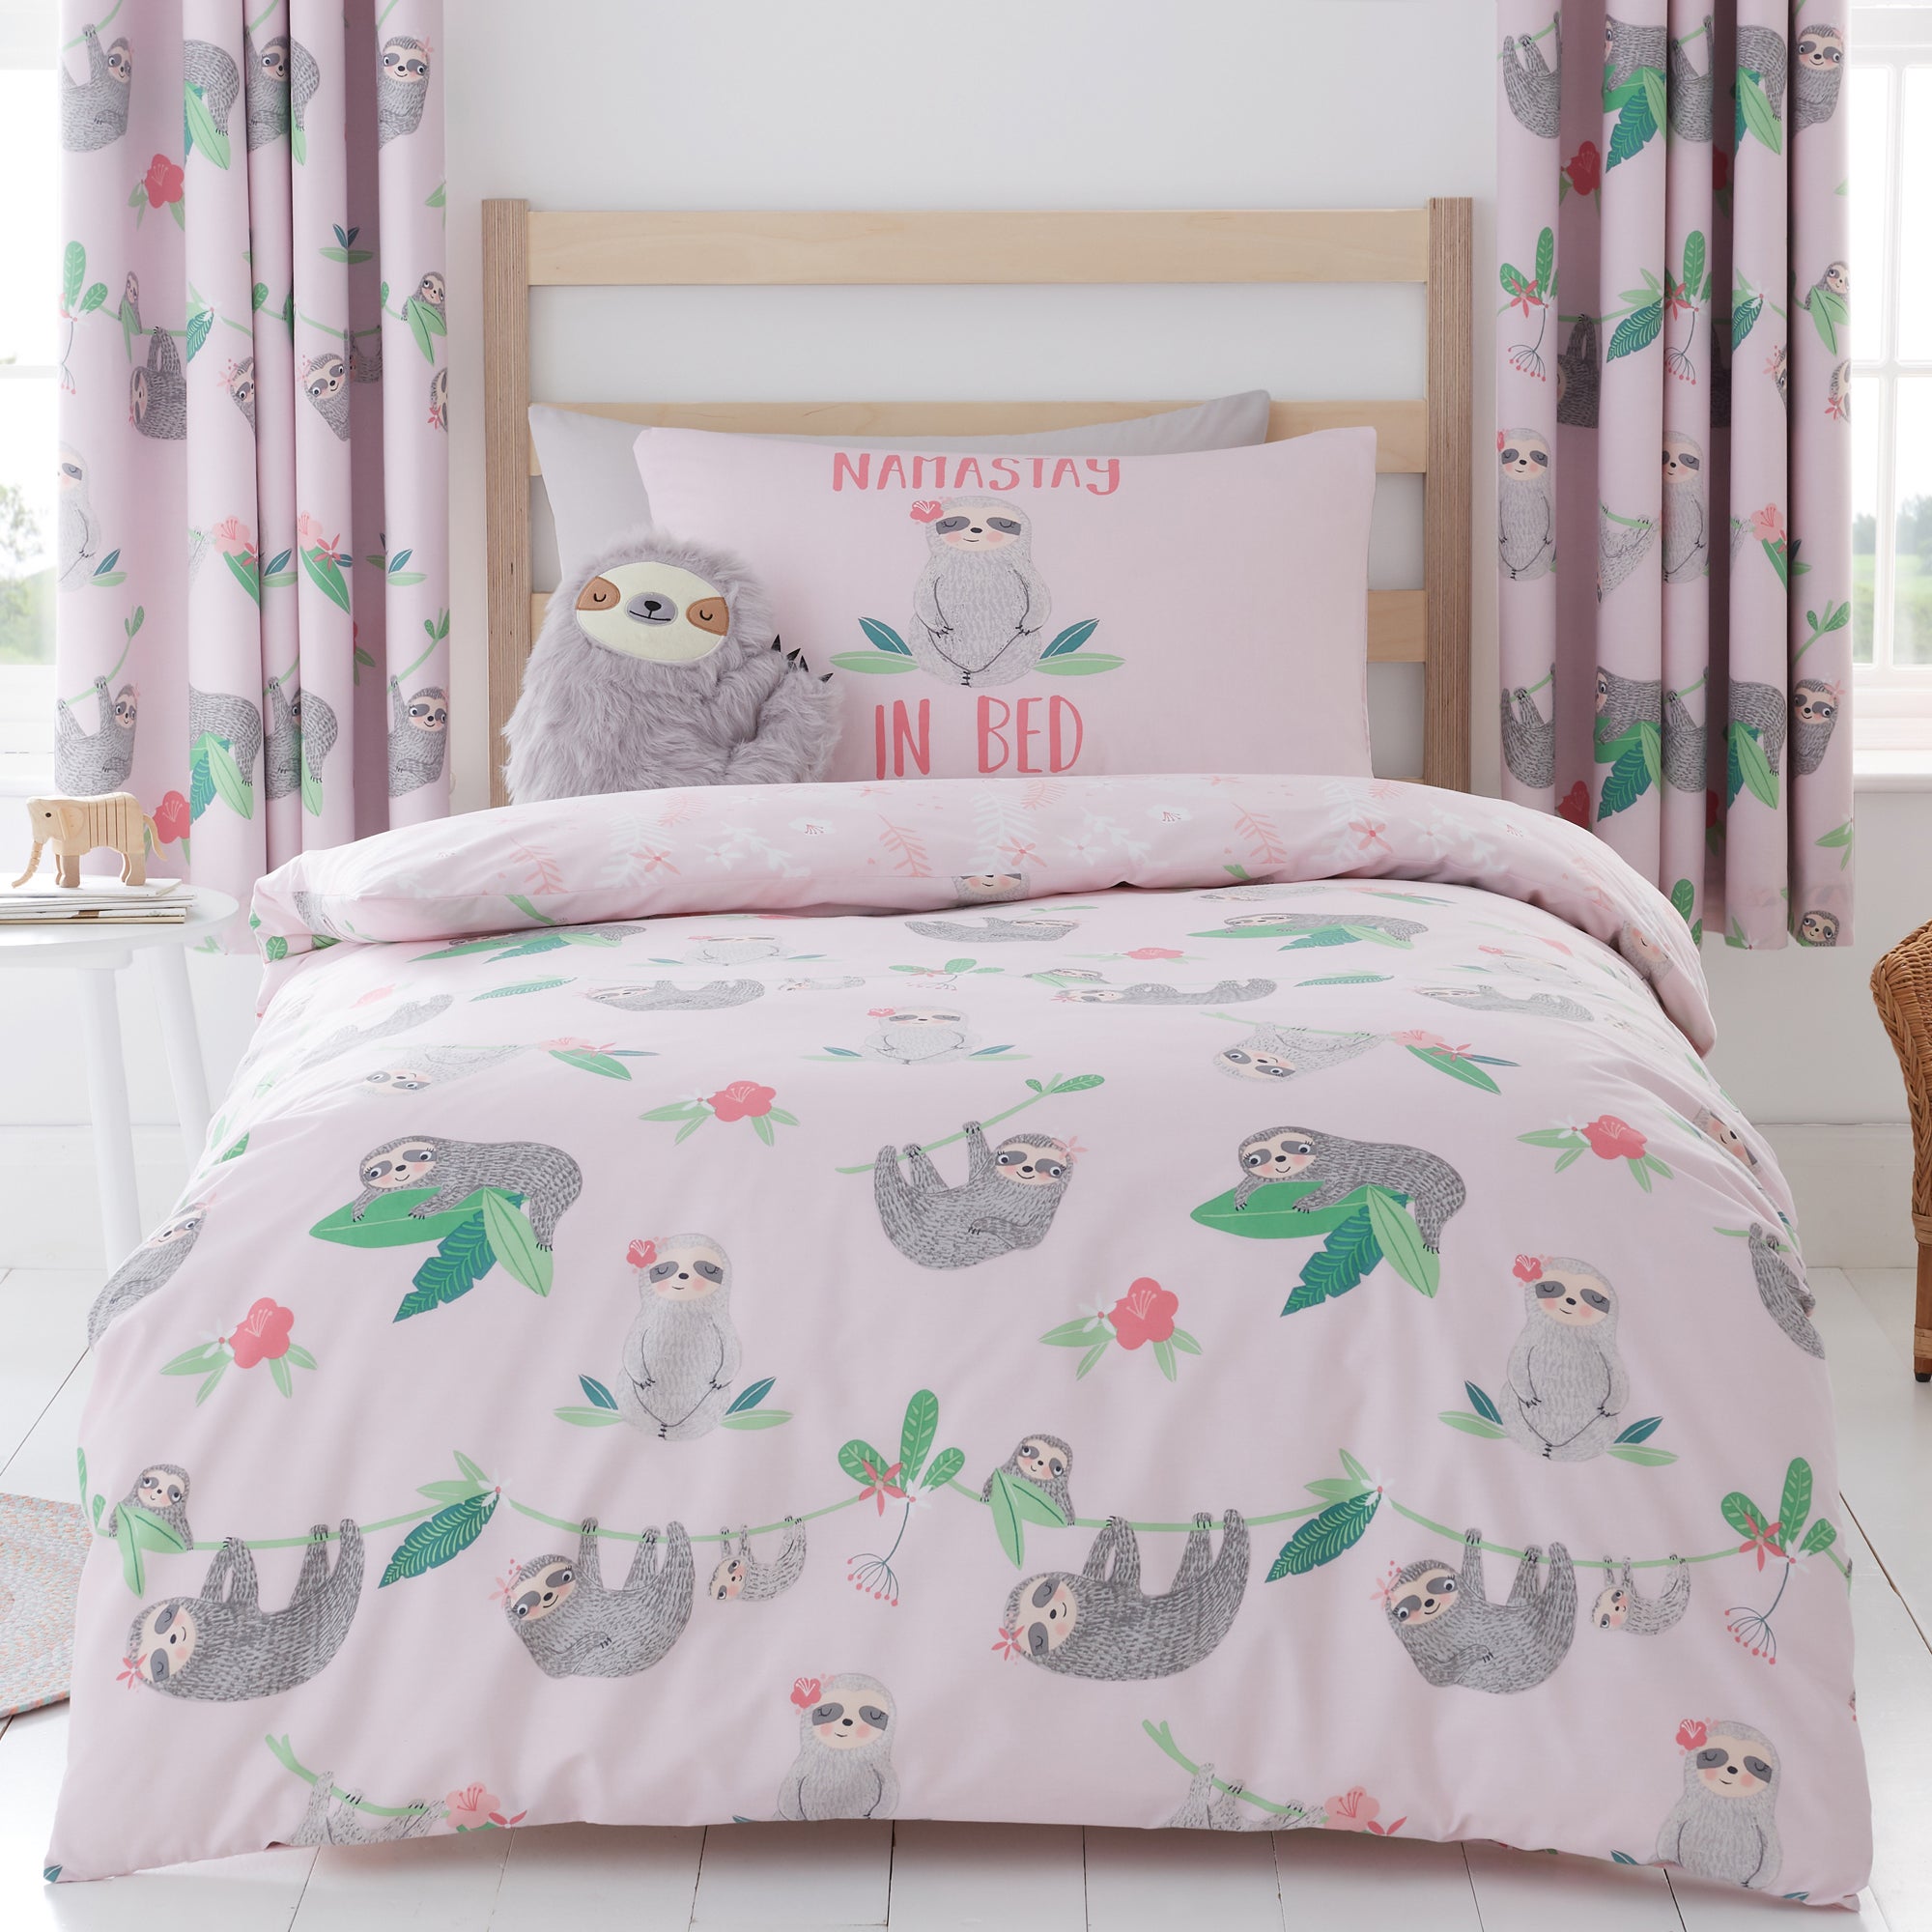 Pink Pretty Sloth Duvet Cover And Pillowcase Set Pink Green And White